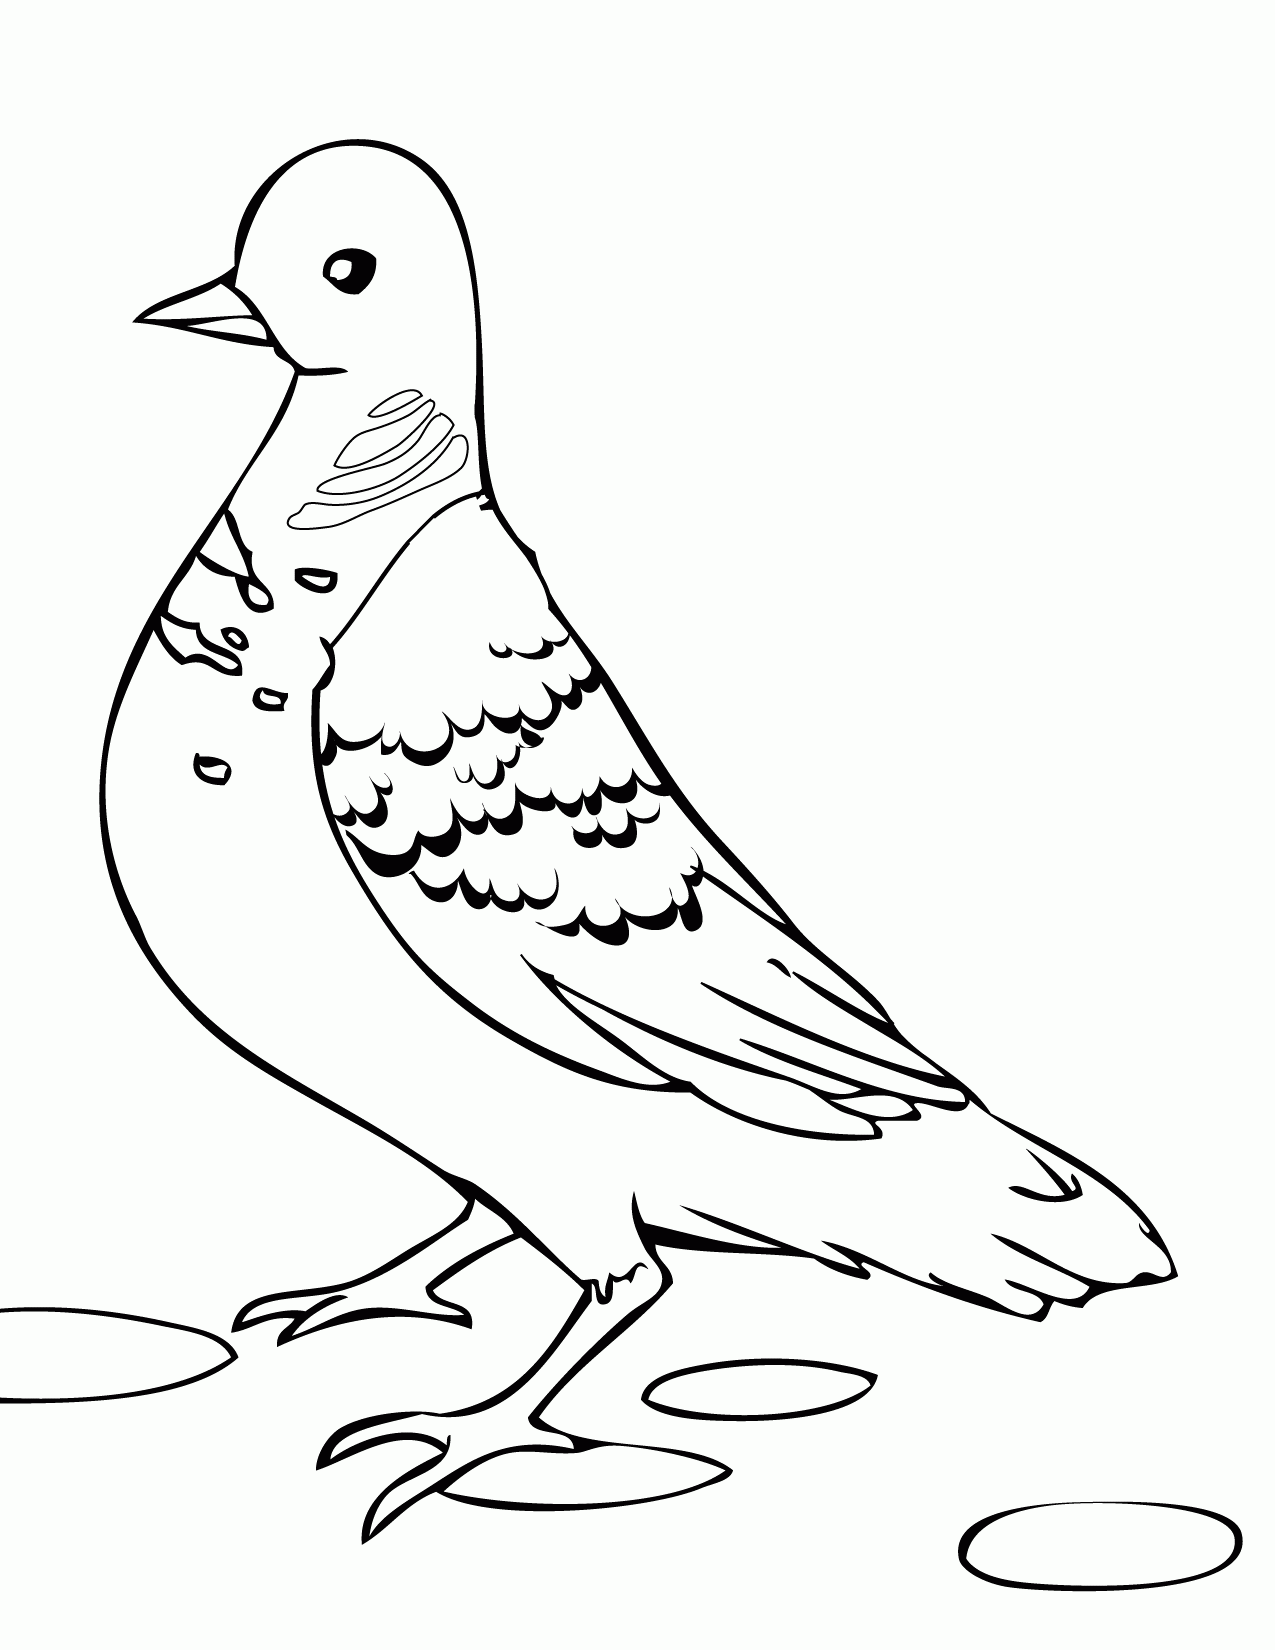 Turtle Dove Coloring Page - Handipoints